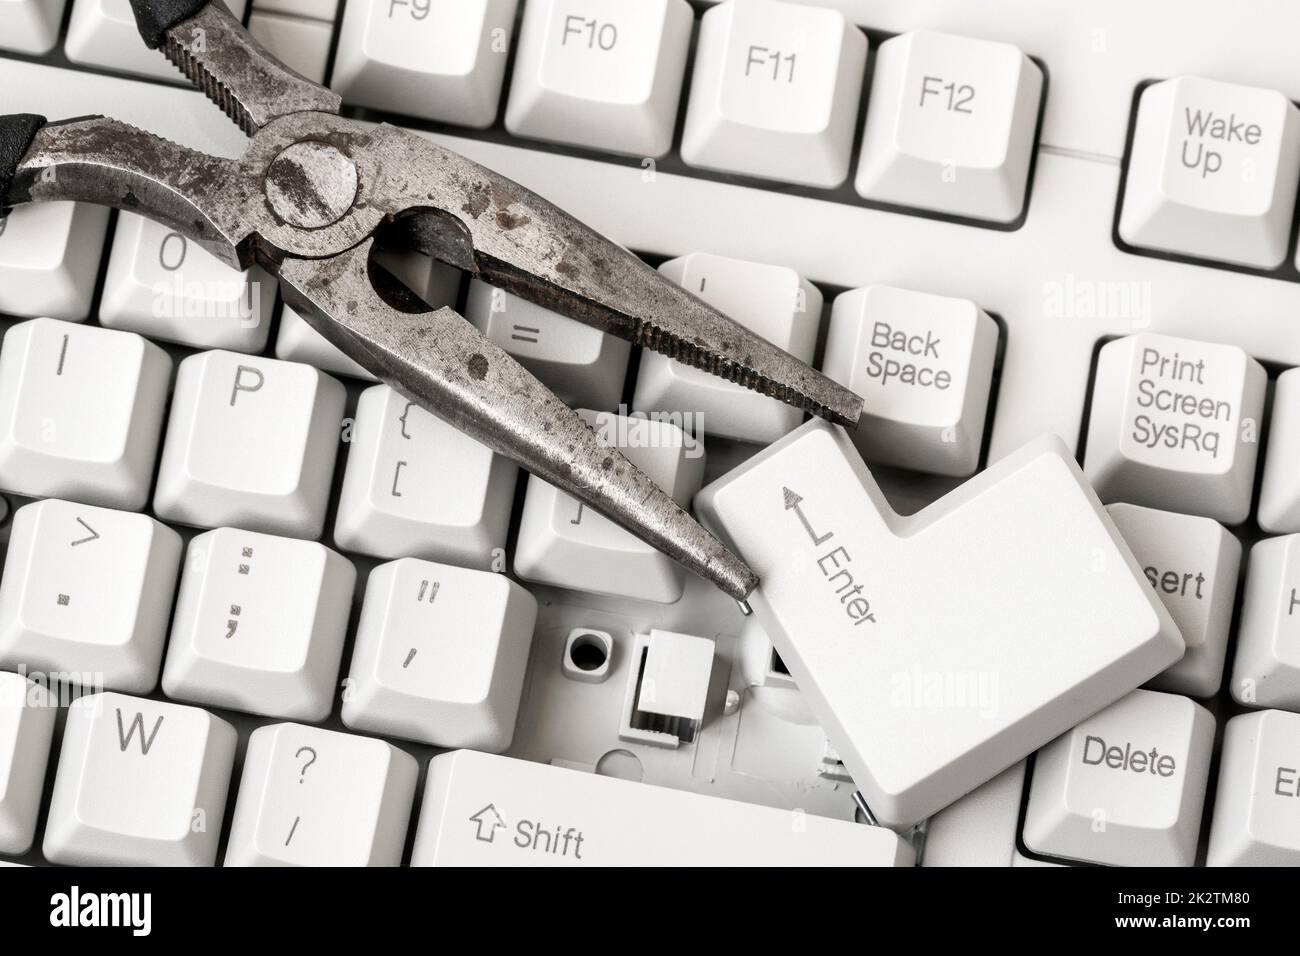 Pliers with ENTER key laying on the keyboard Stock Photo